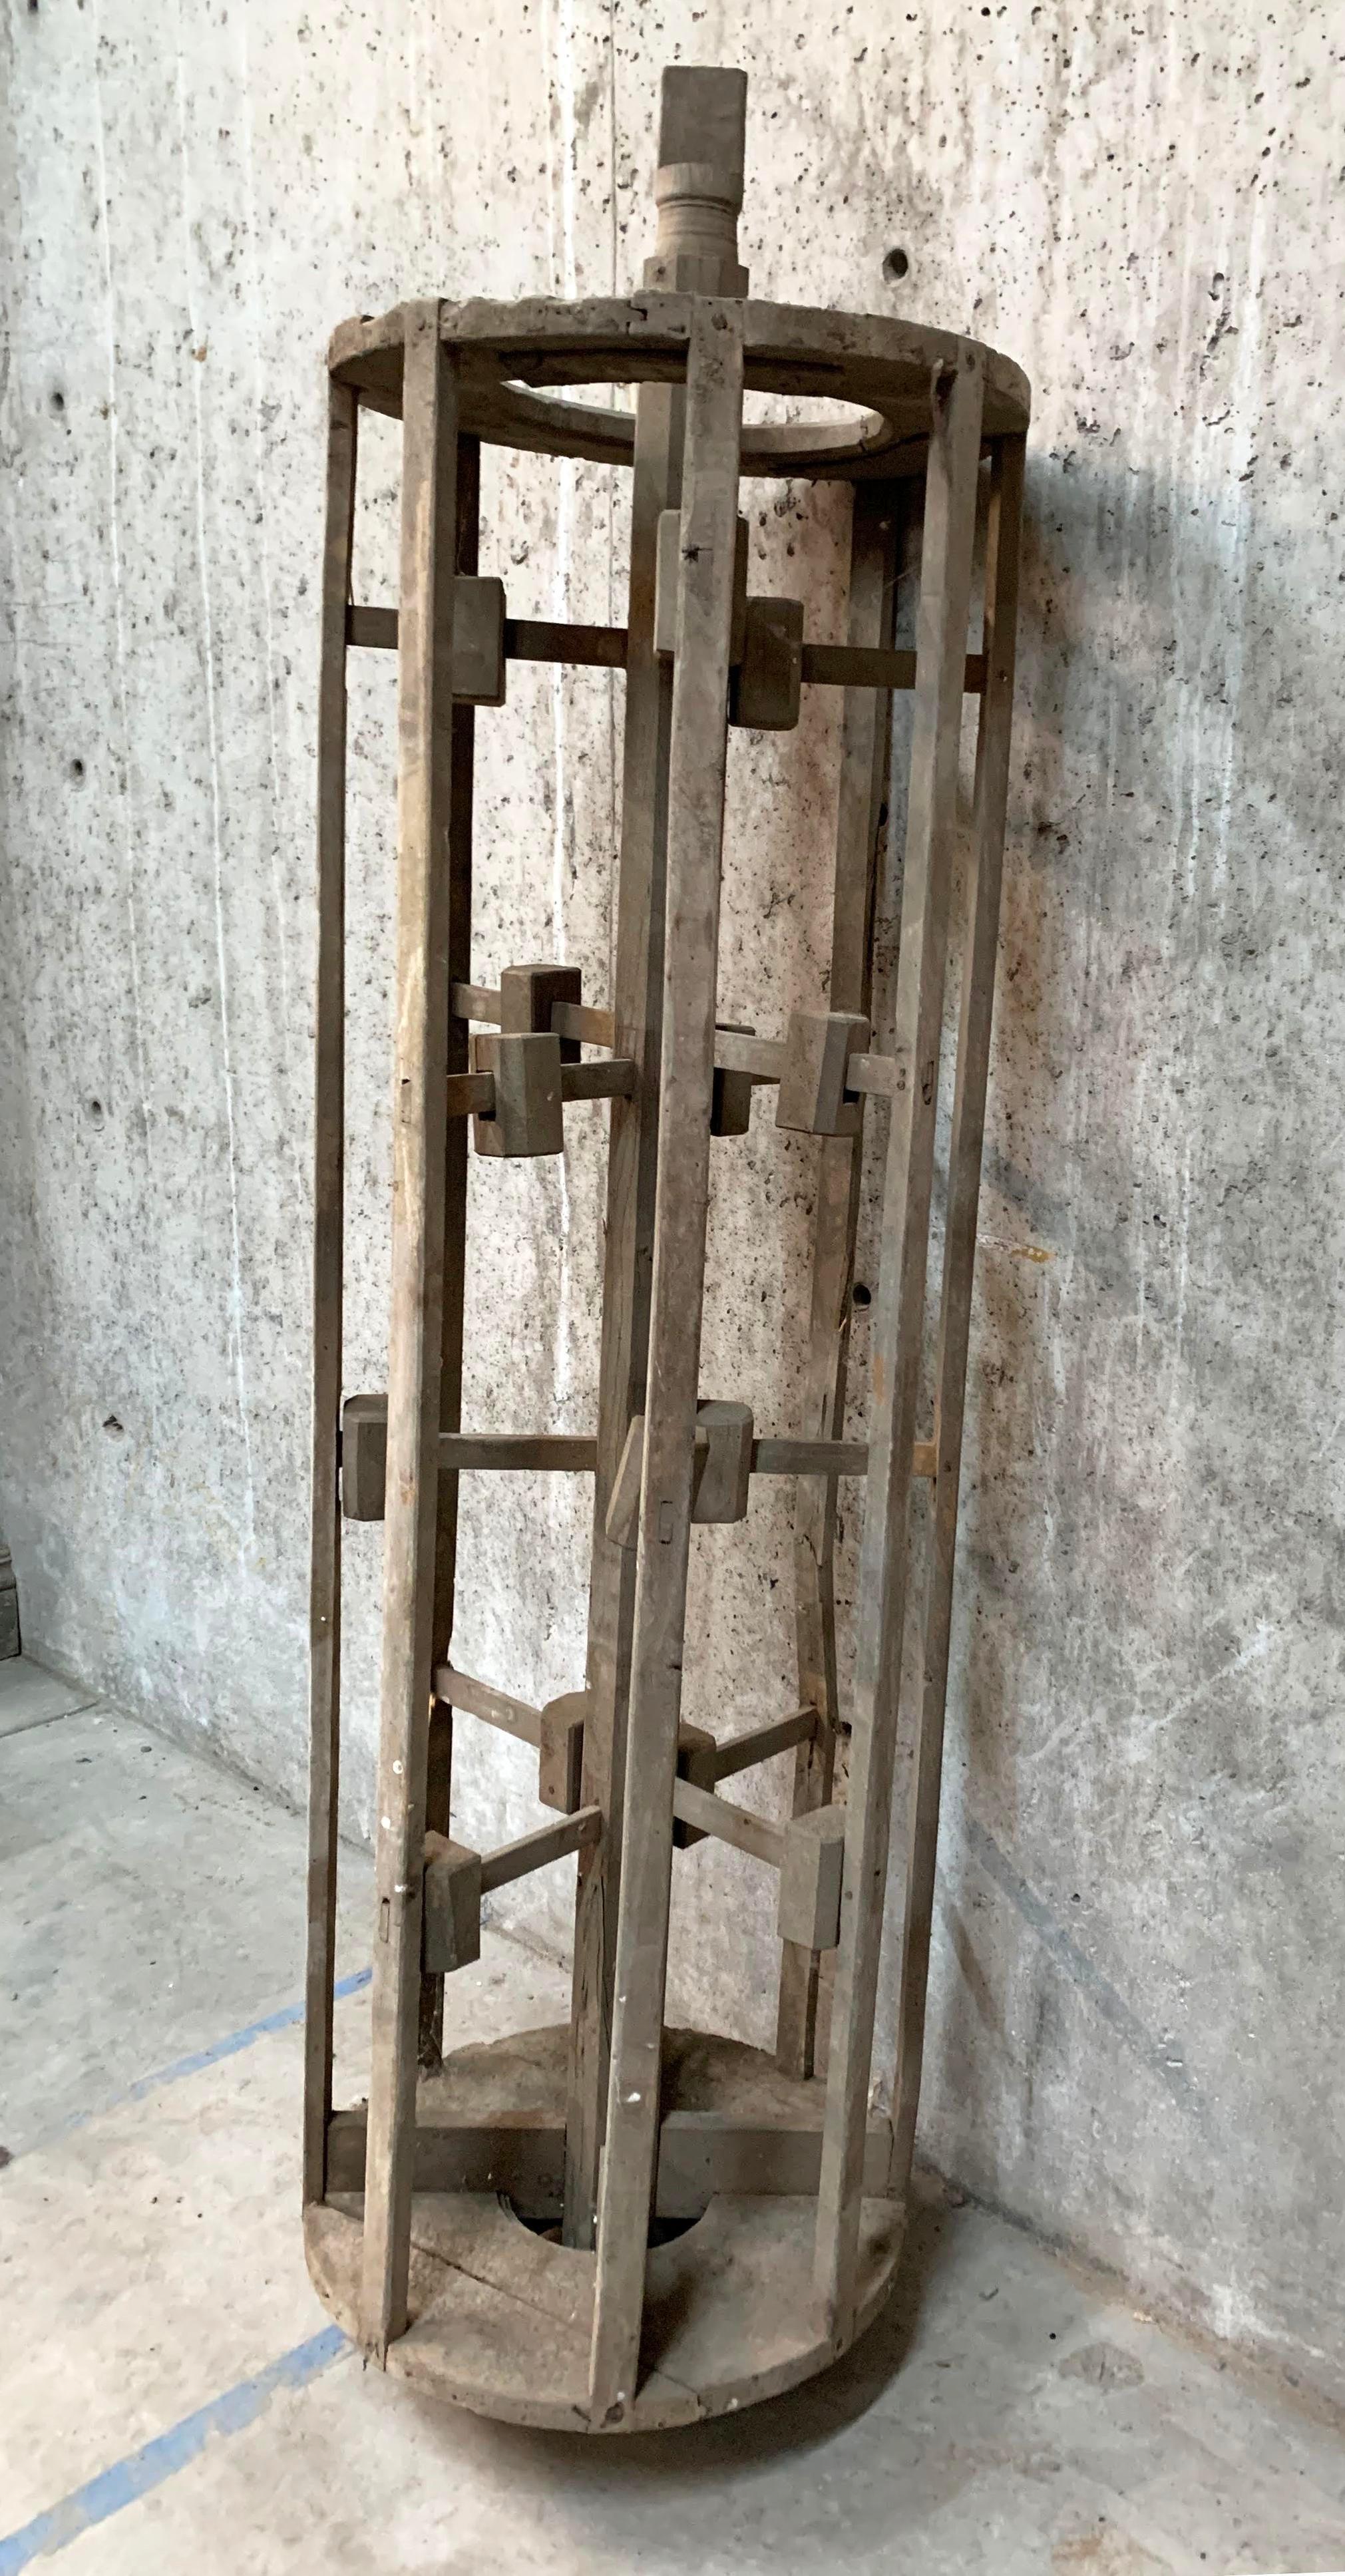 Large Antique rustic harvest wooden thresher / combine tool make a great sculptural piece. It could be wired and converted to a light to make a dramatic and unique light fixture.

Acquired on a buy trip to Southwestern France in 2019

Excellent used